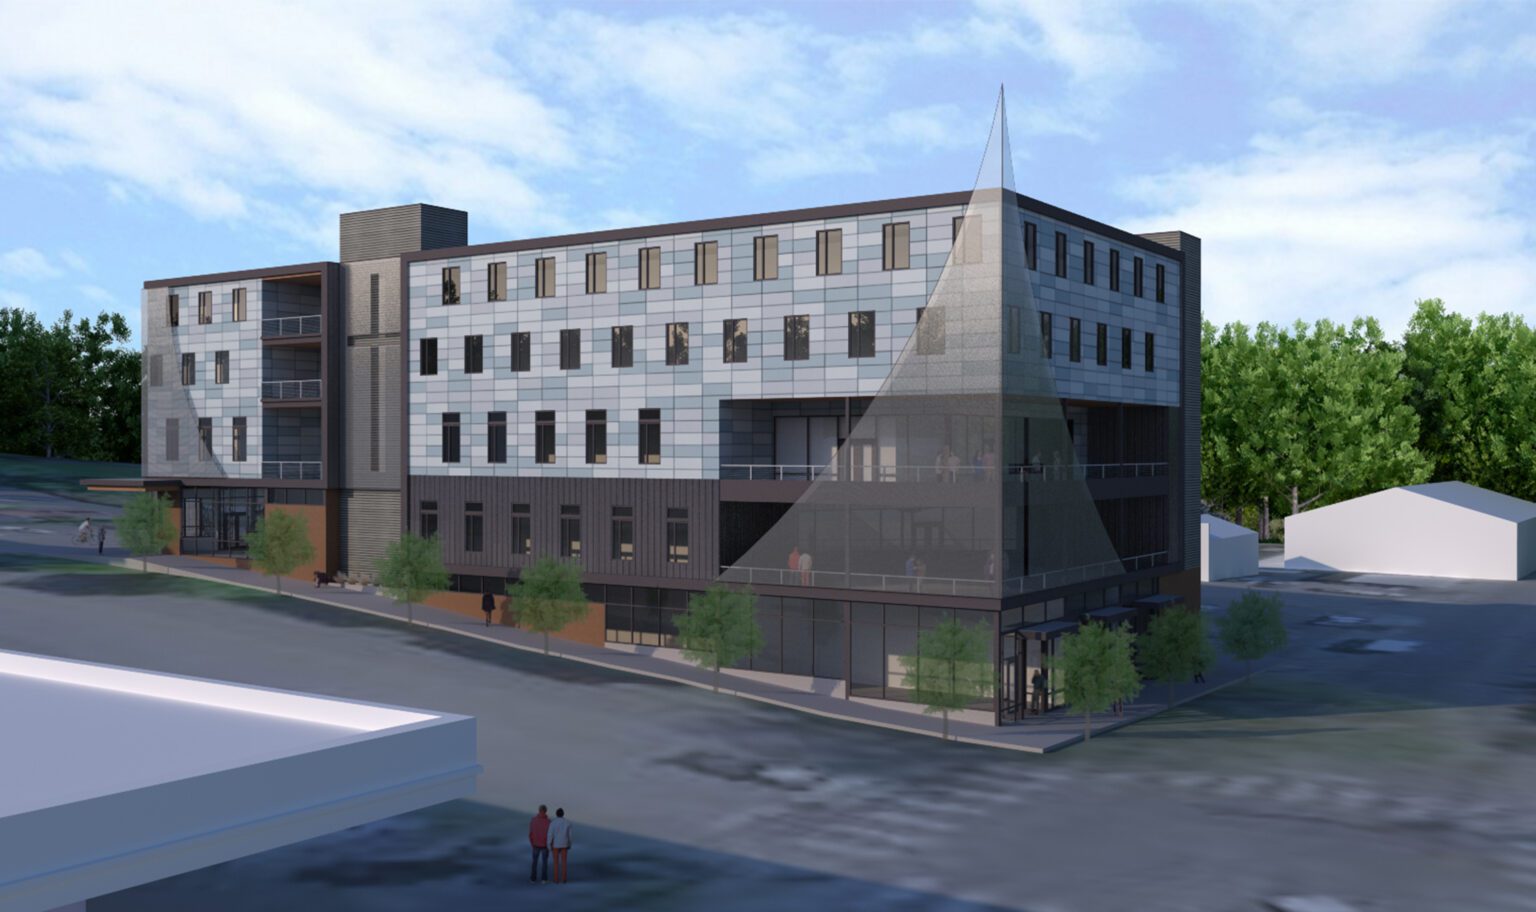 A visual graphic of a completed 300-bed, five story homeless shelter once completed.